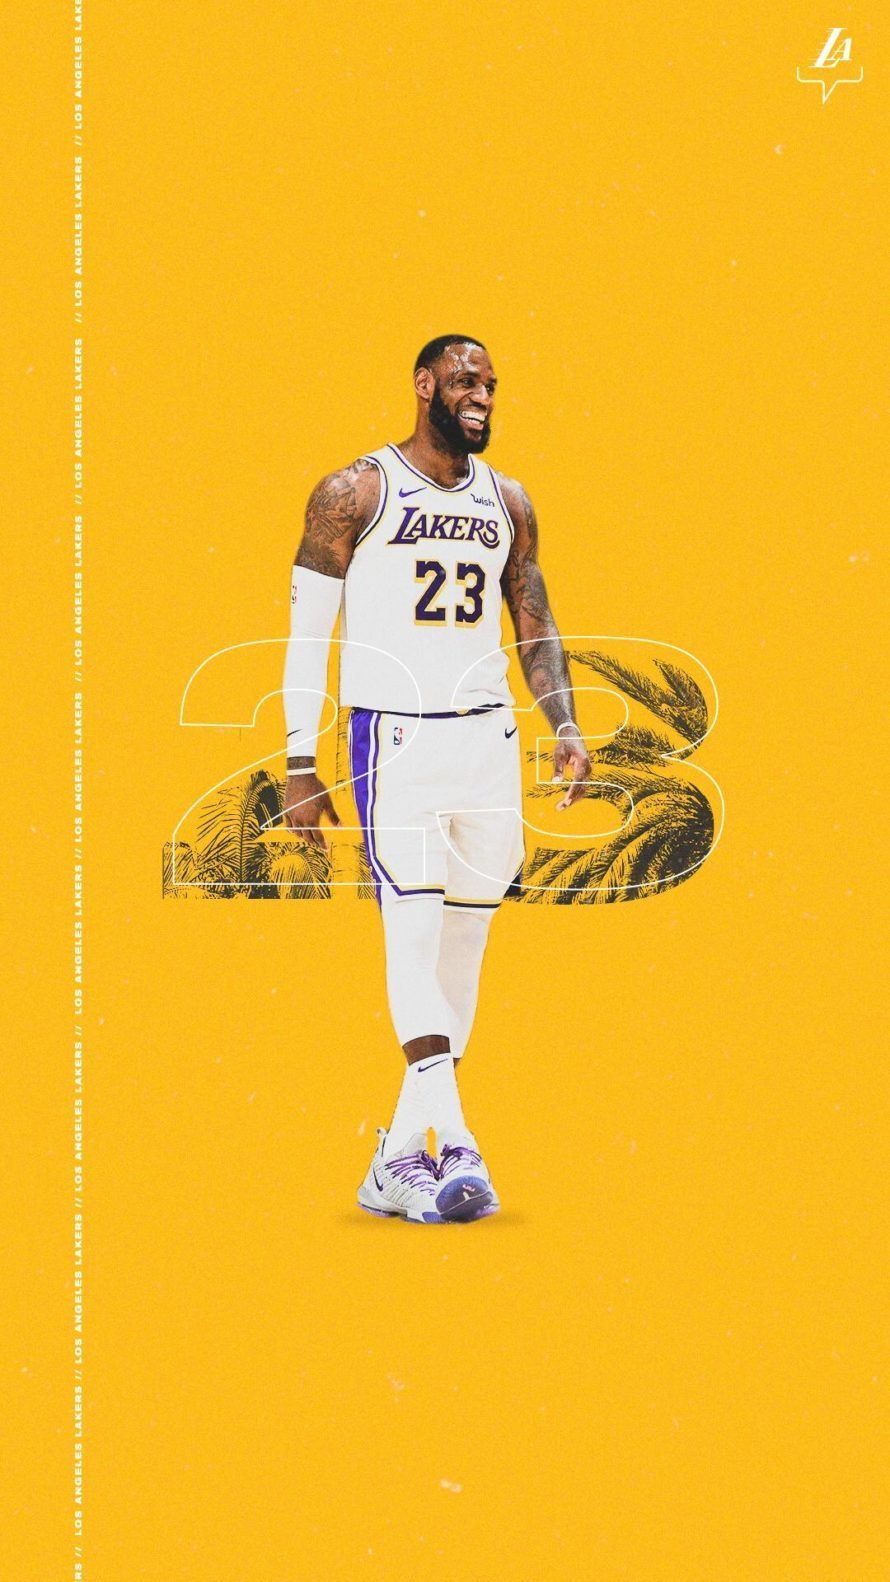 Lakers wallpaper iPhone Android NBA 2020-2021 season. Get ready for the best NBA season ever with these new Lakers phone backgrounds. - NBA